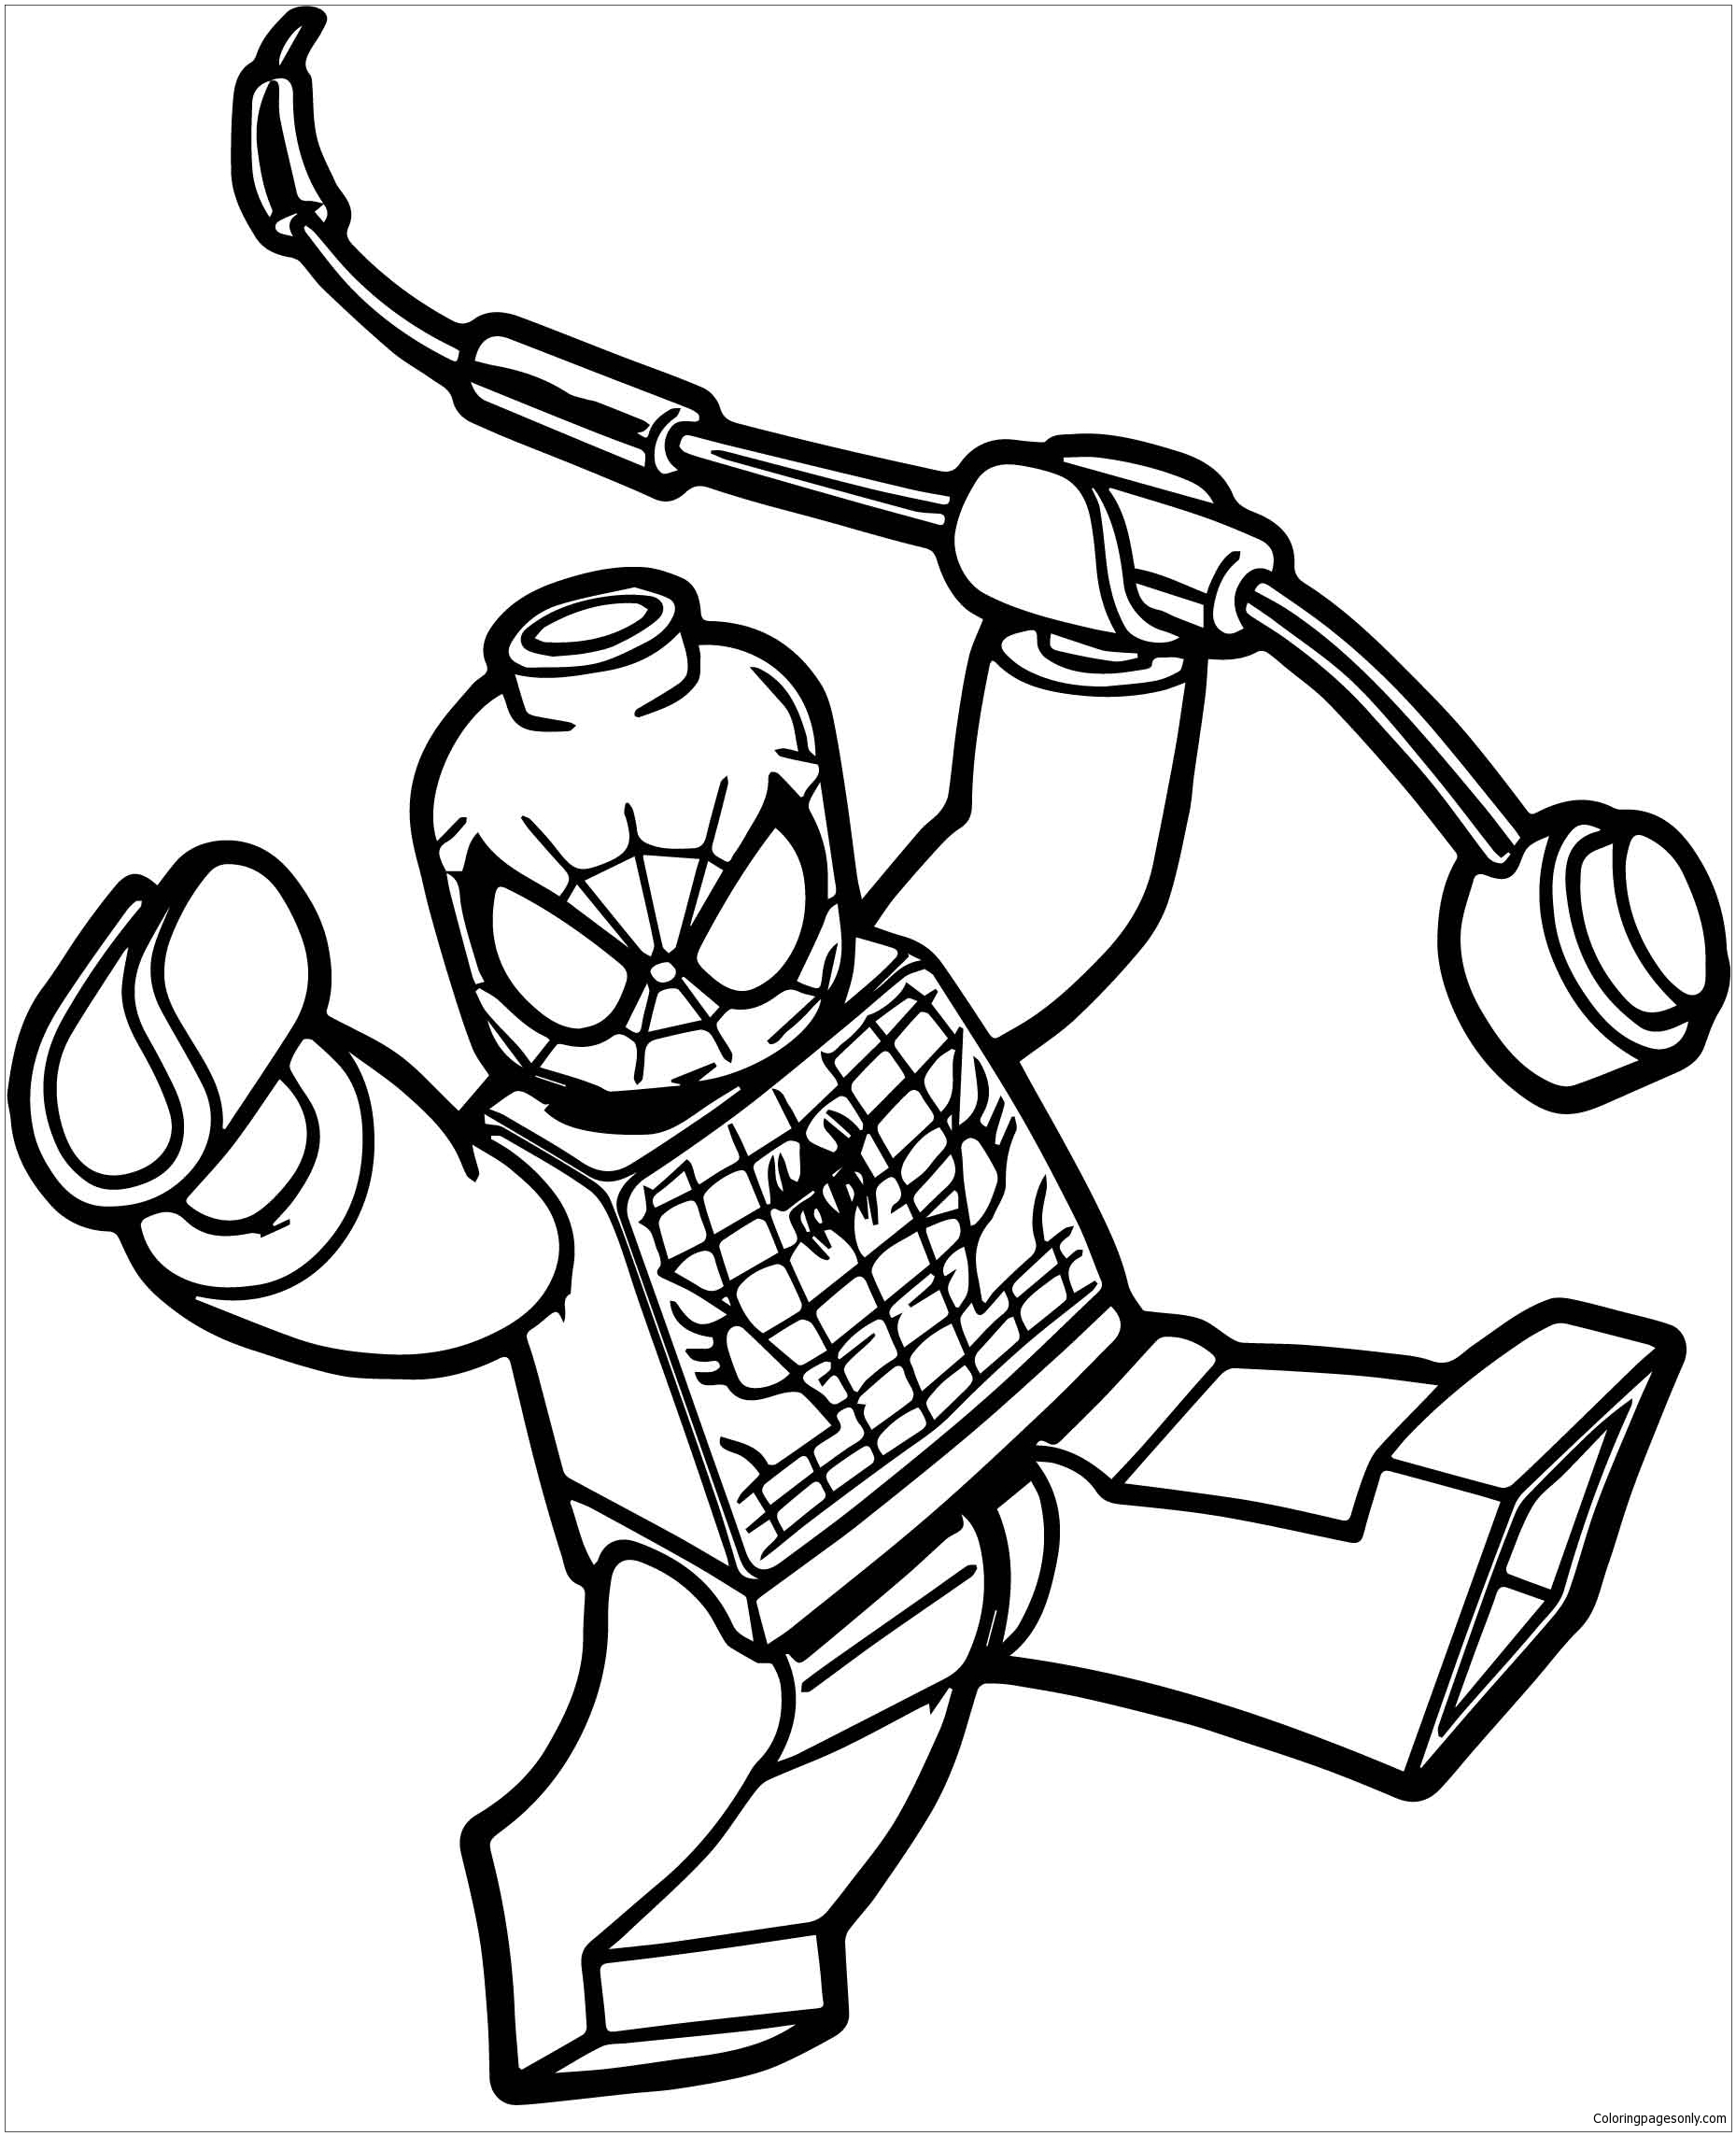 Box Spiderman Lego Spider Man Coloring Page - Free Coloring Pages Online